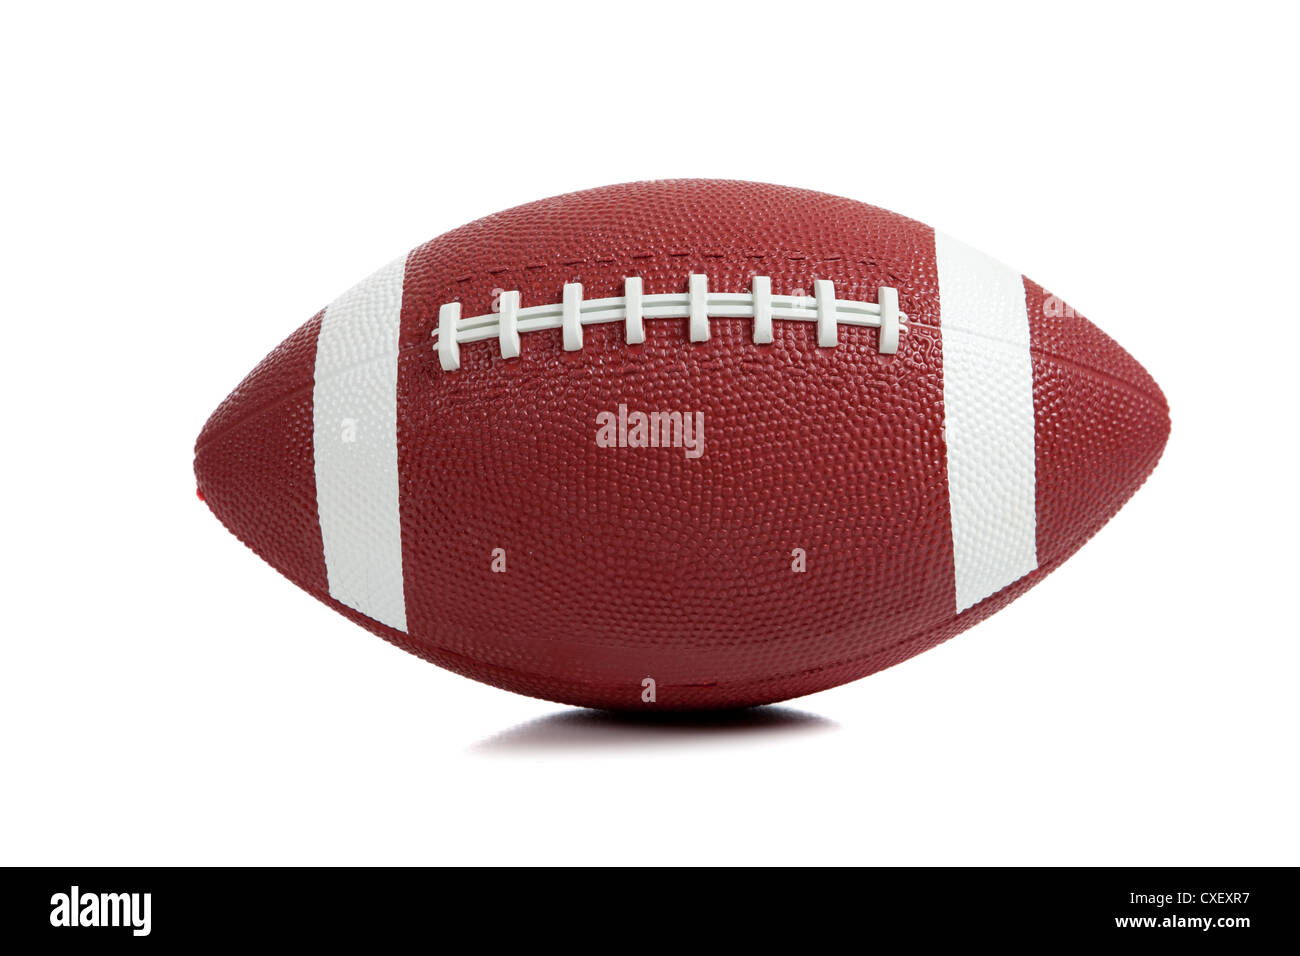 An American football on a white background Stock Photo